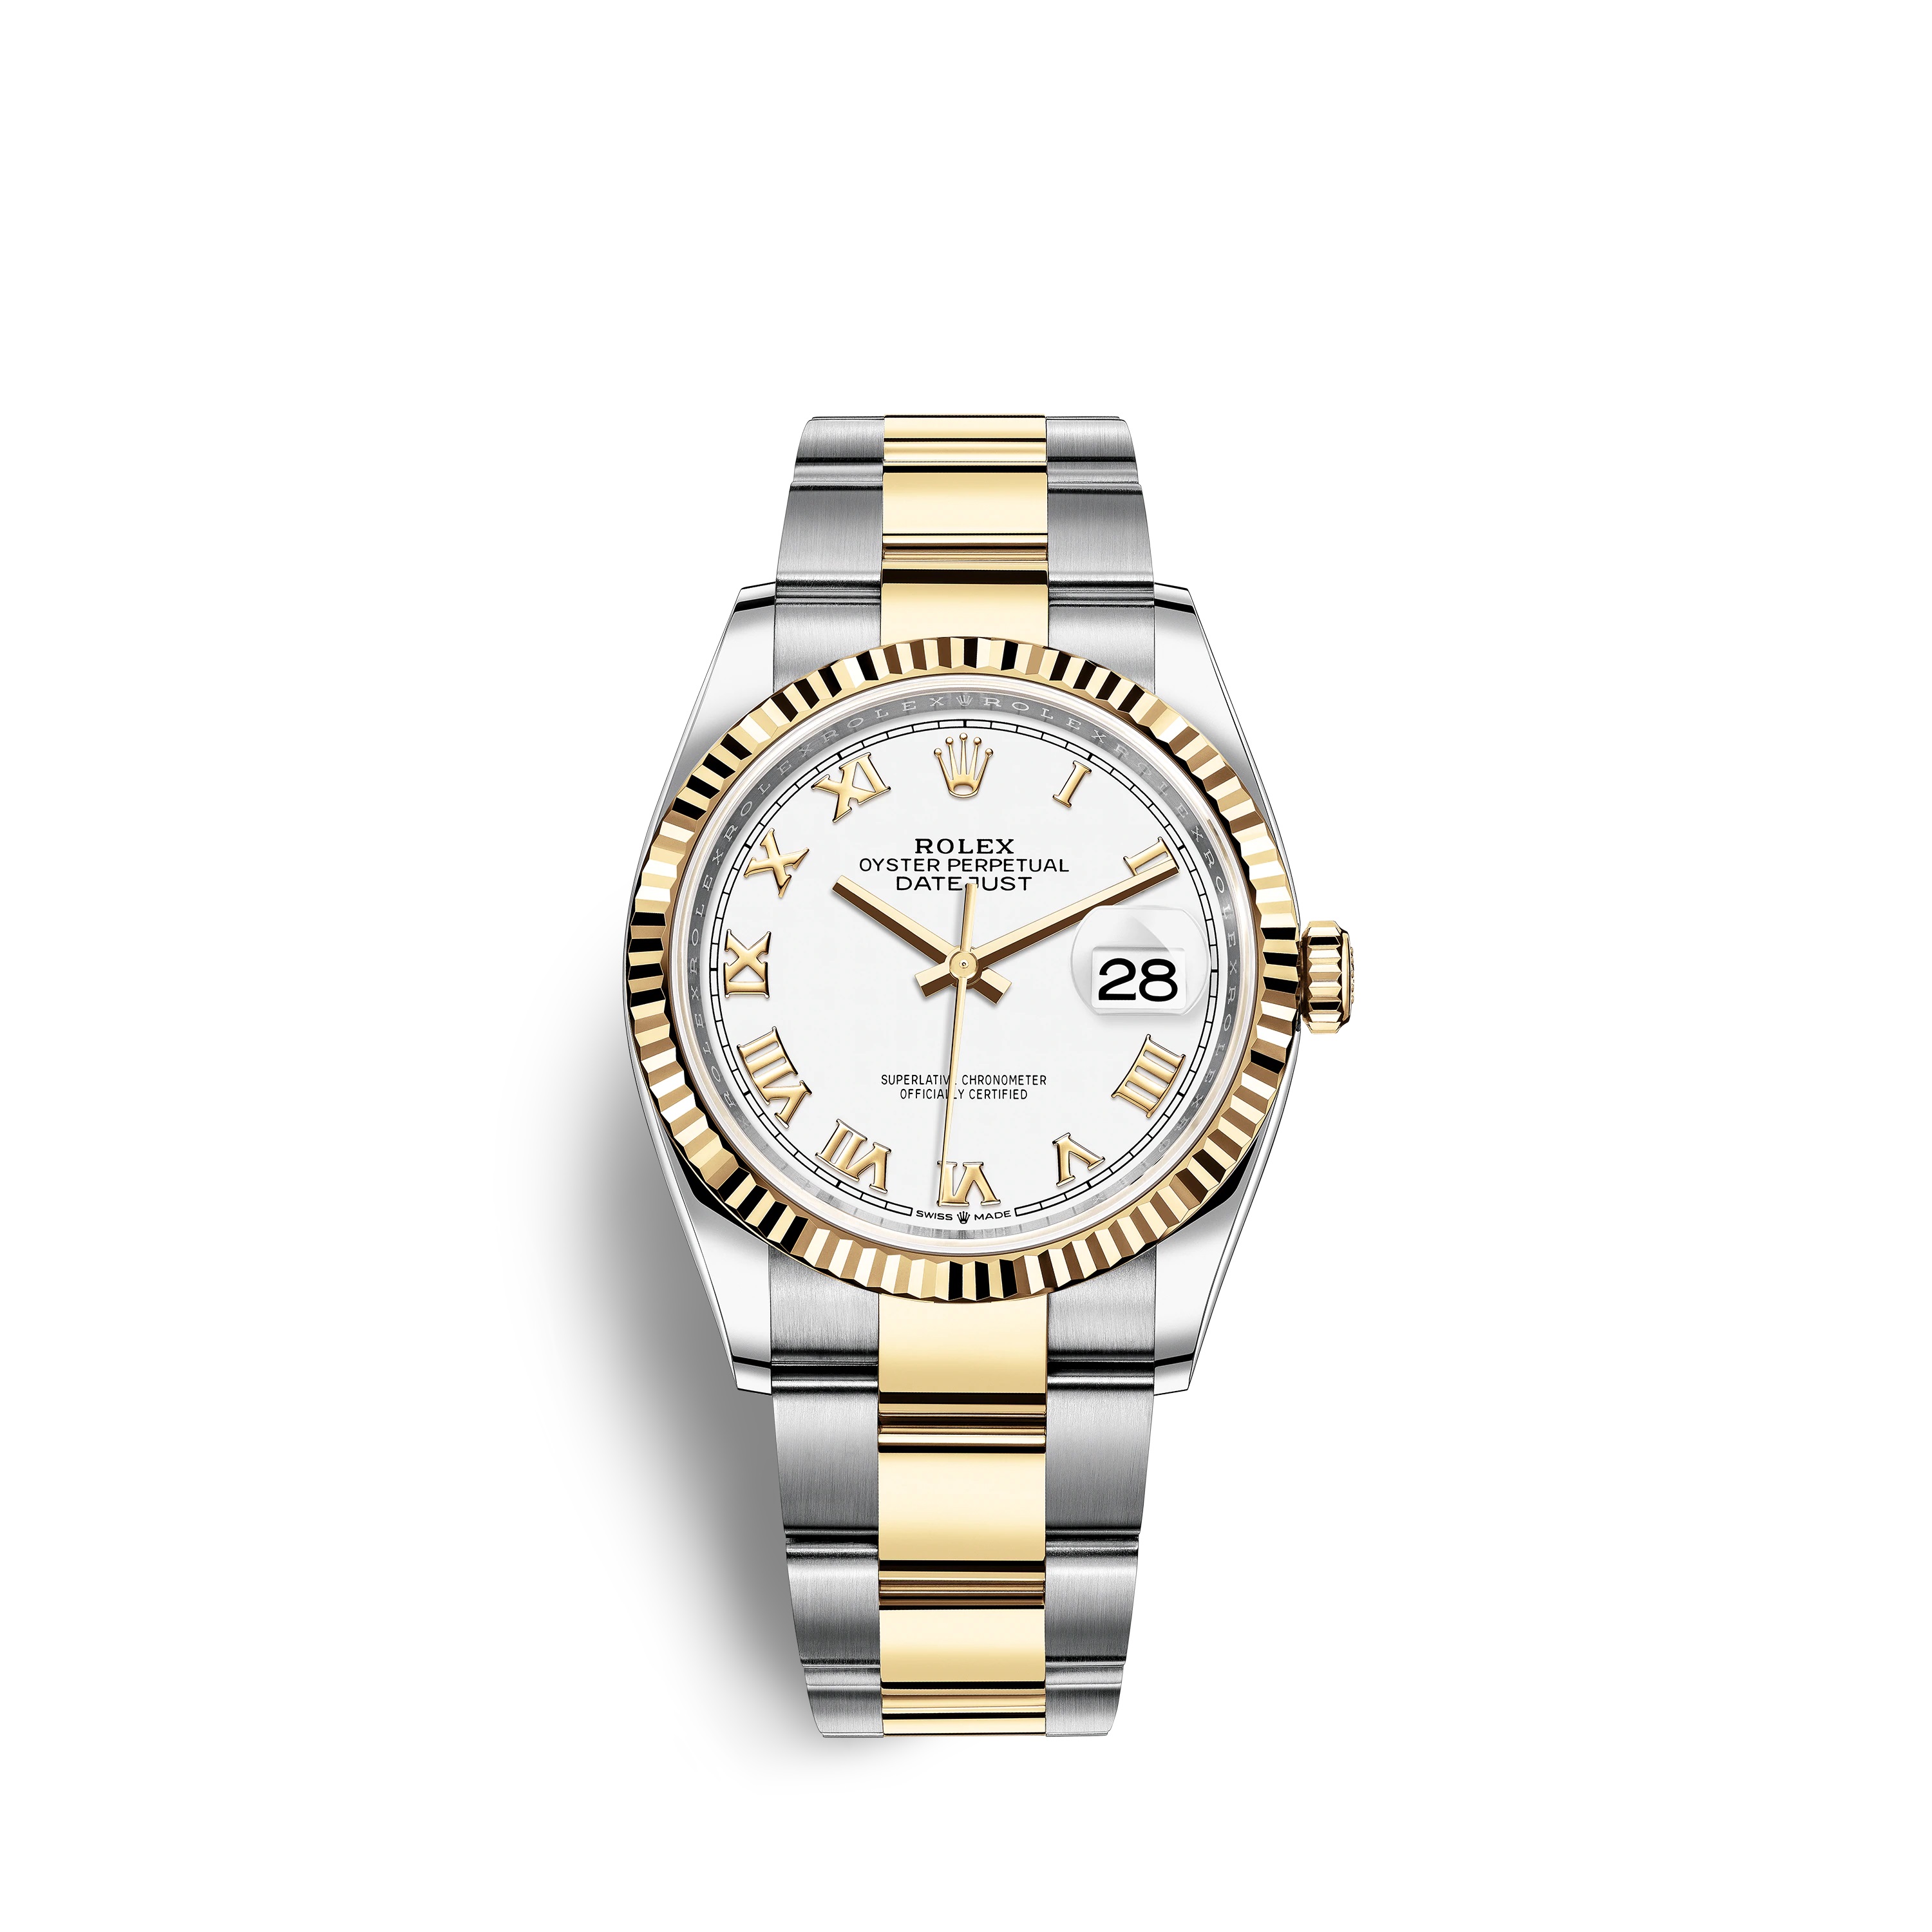 Datejust 36 126233 Gold & Stainless Steel Watch (White)